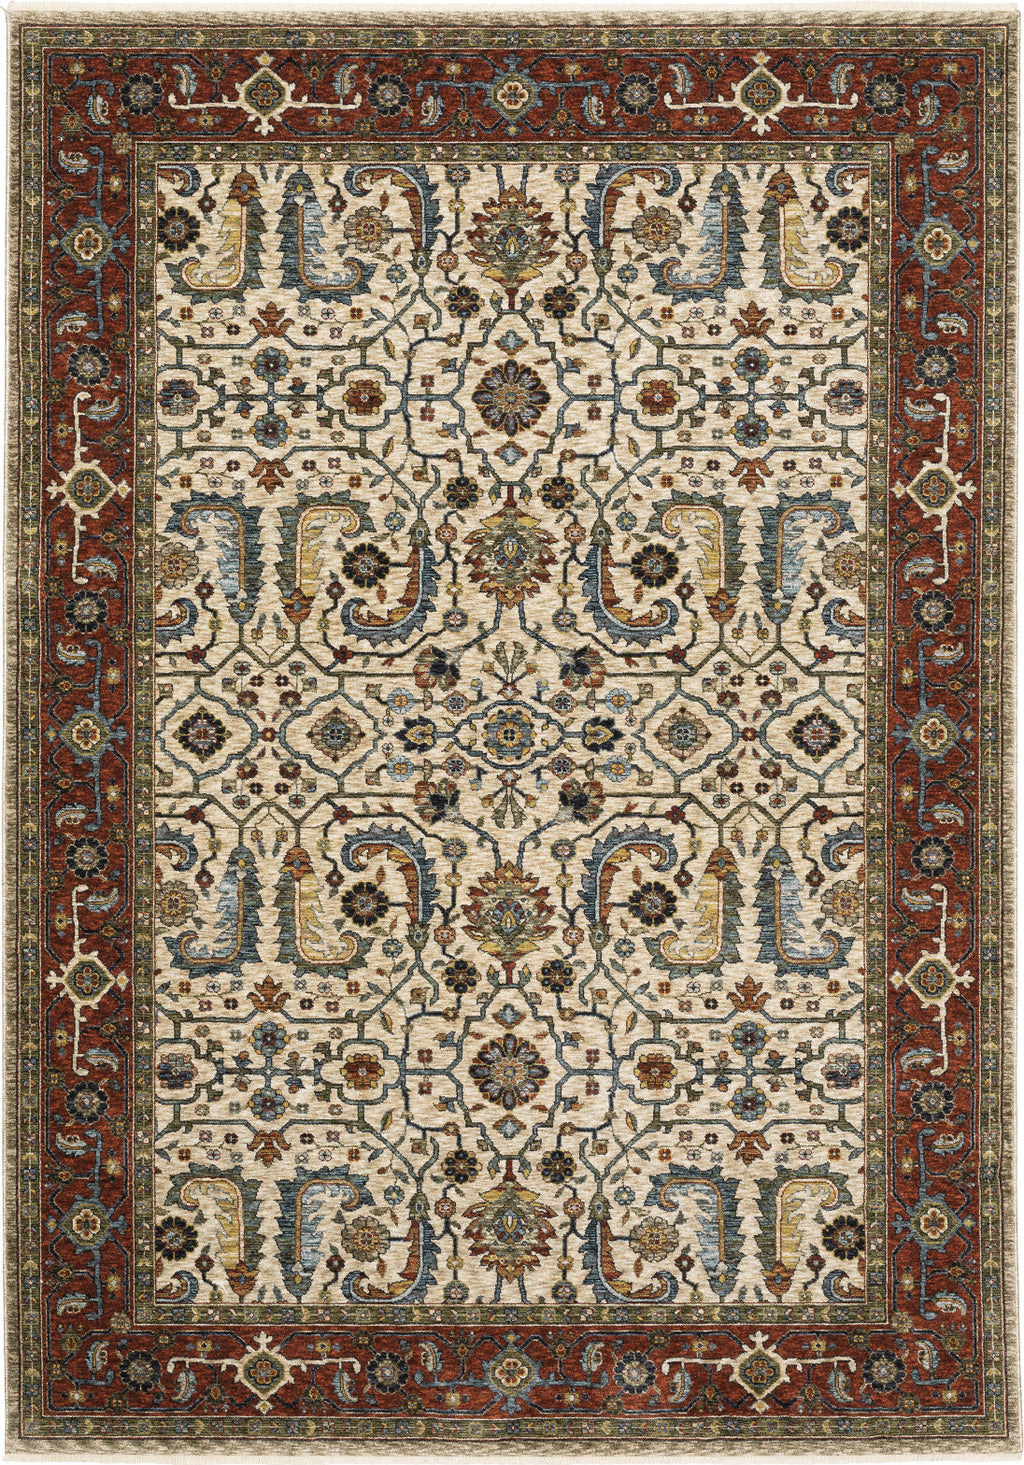 Oriental Weavers Aberdeen 144D1 Ivory/Red Area Rug main image Featured